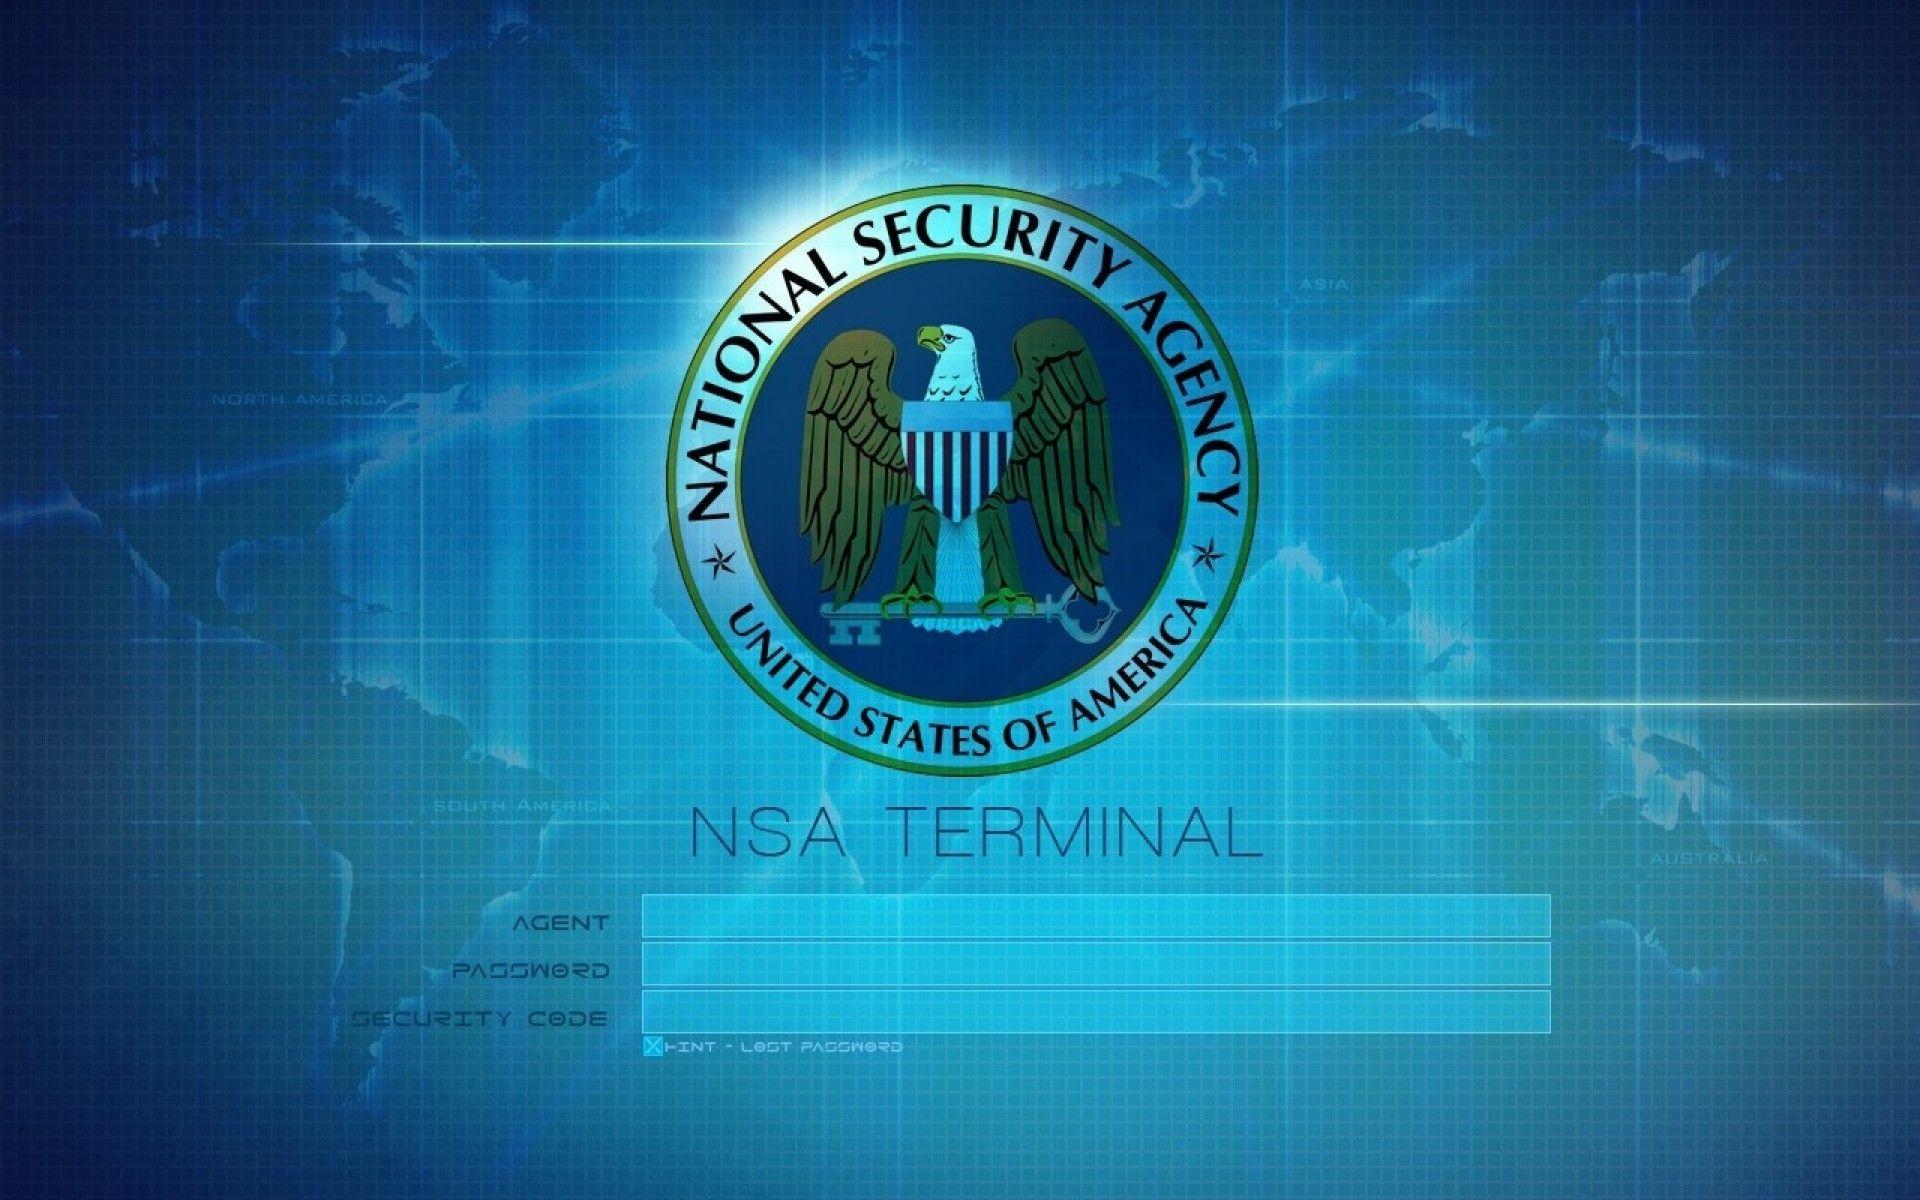 Box login the National Security Agency. Desktop wallpaper for free